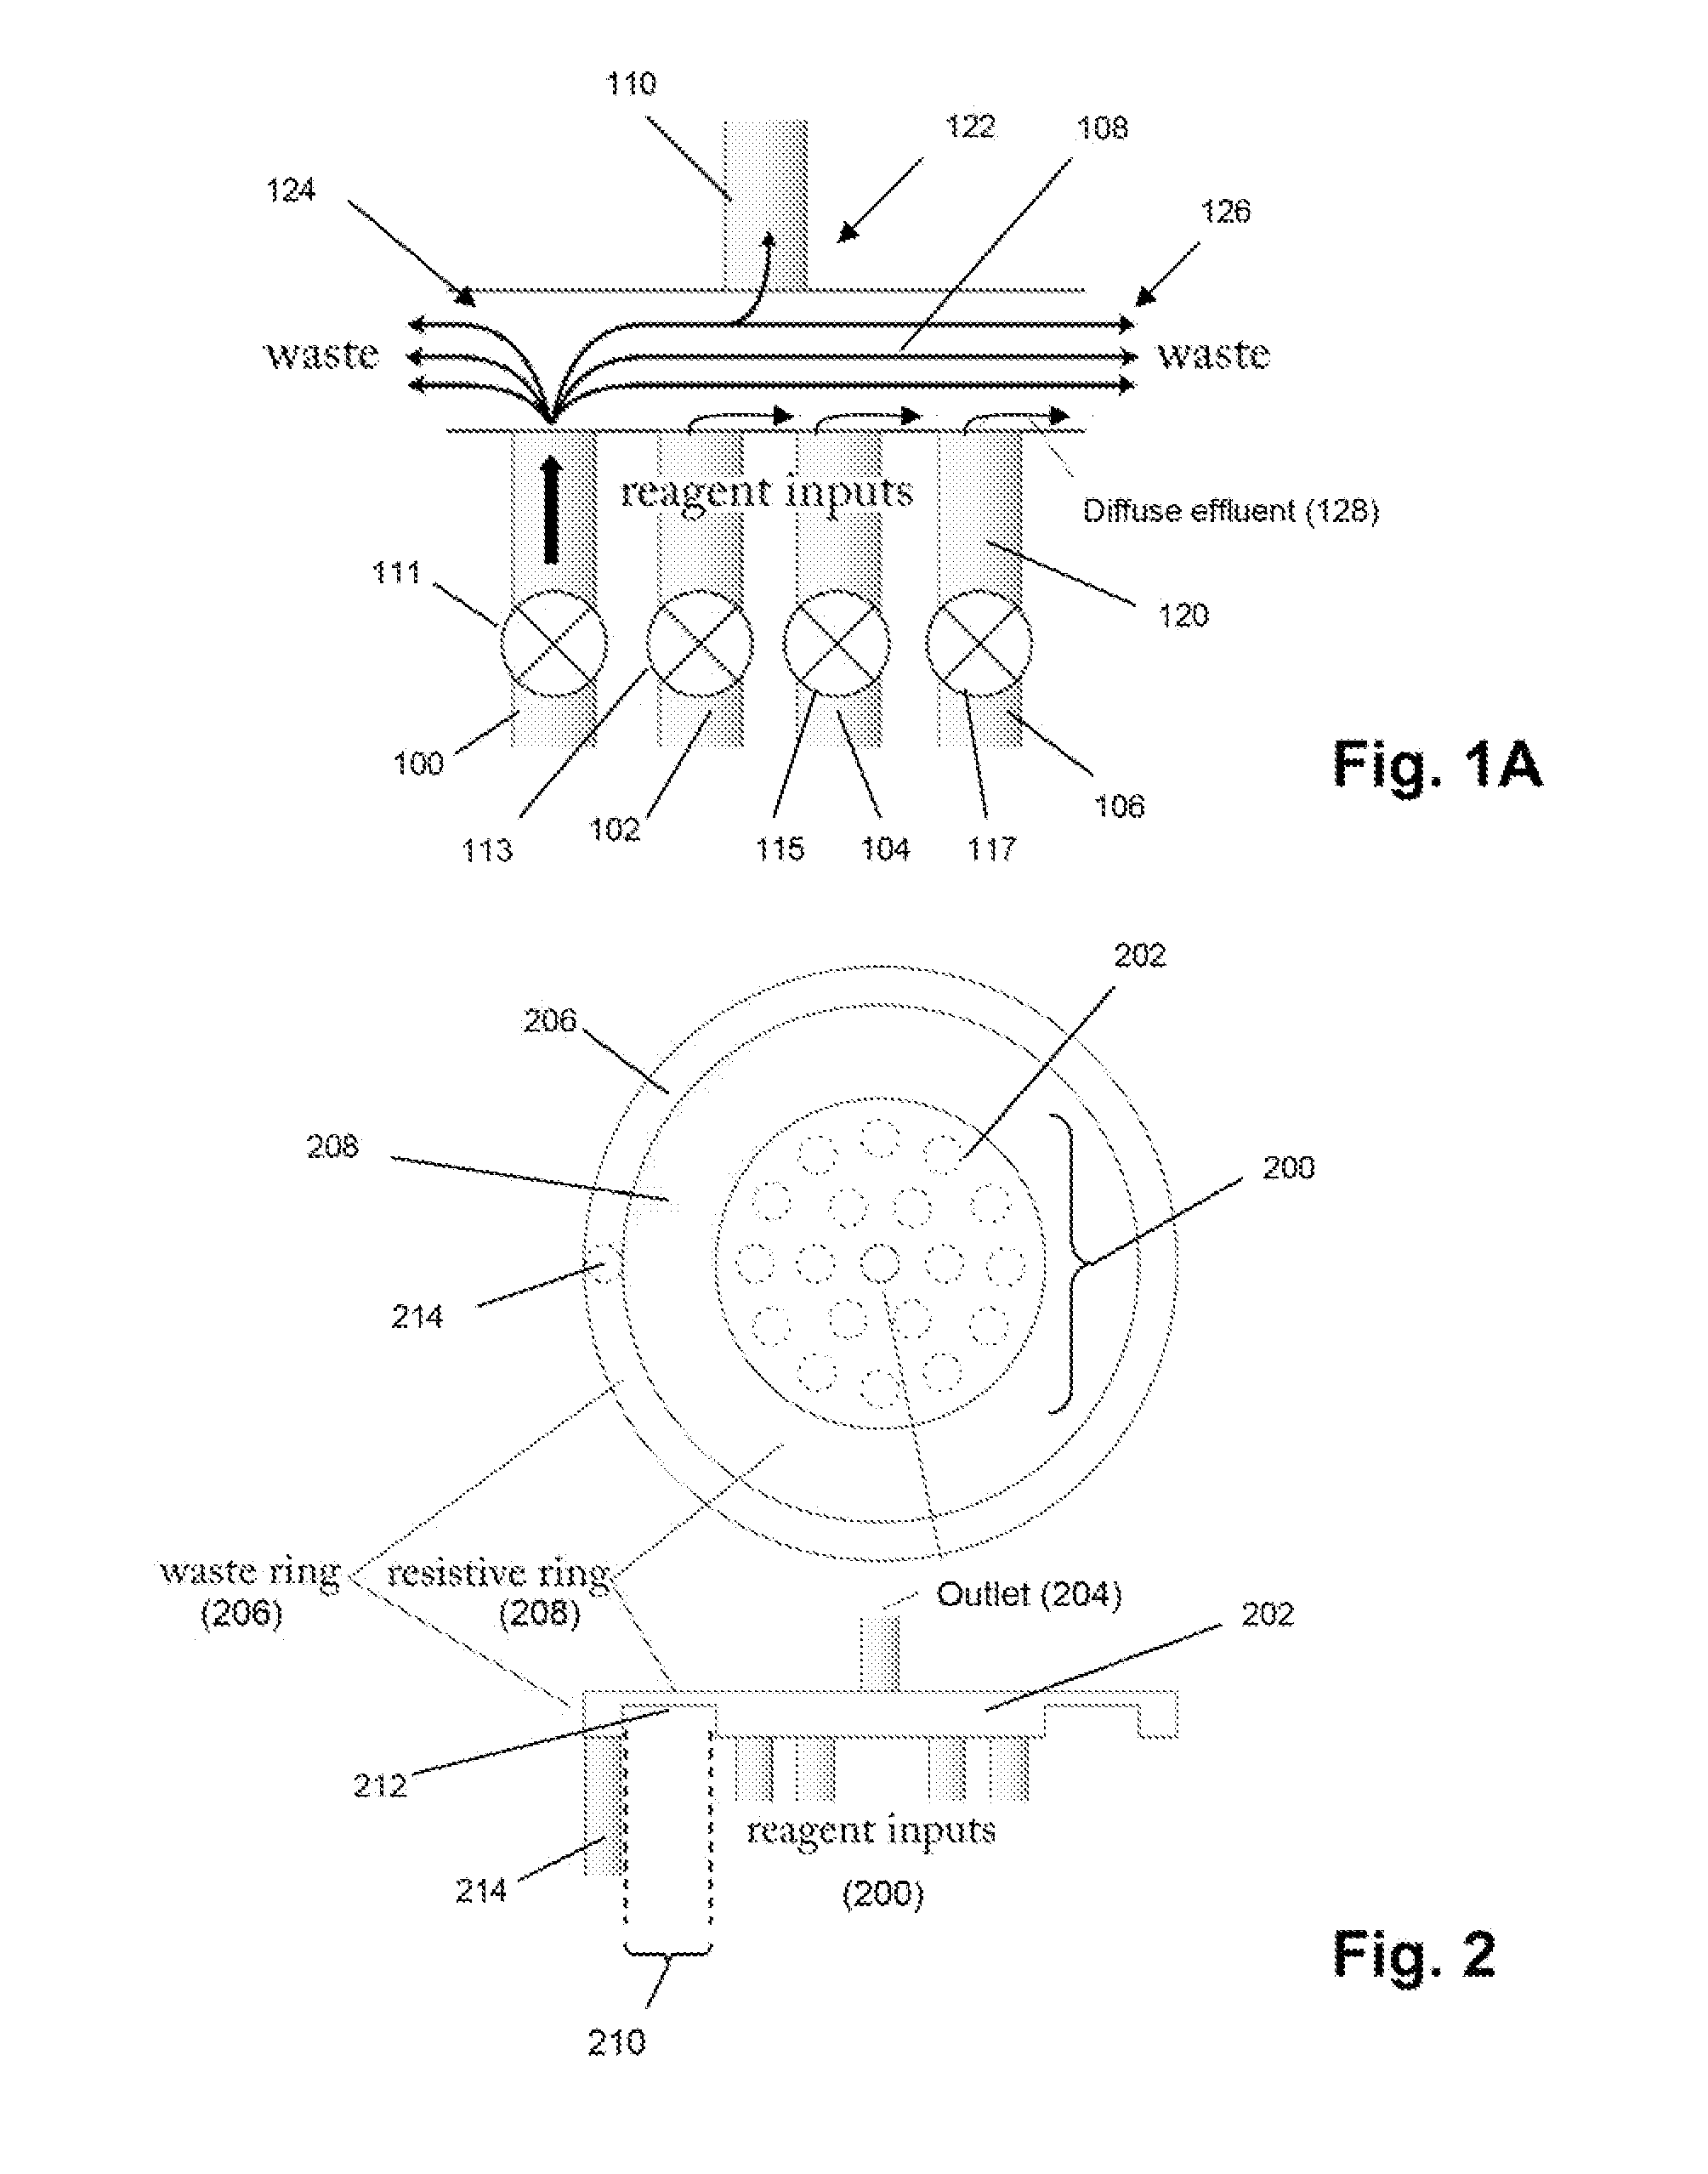 Fluidics system for sequential delivery of reagents